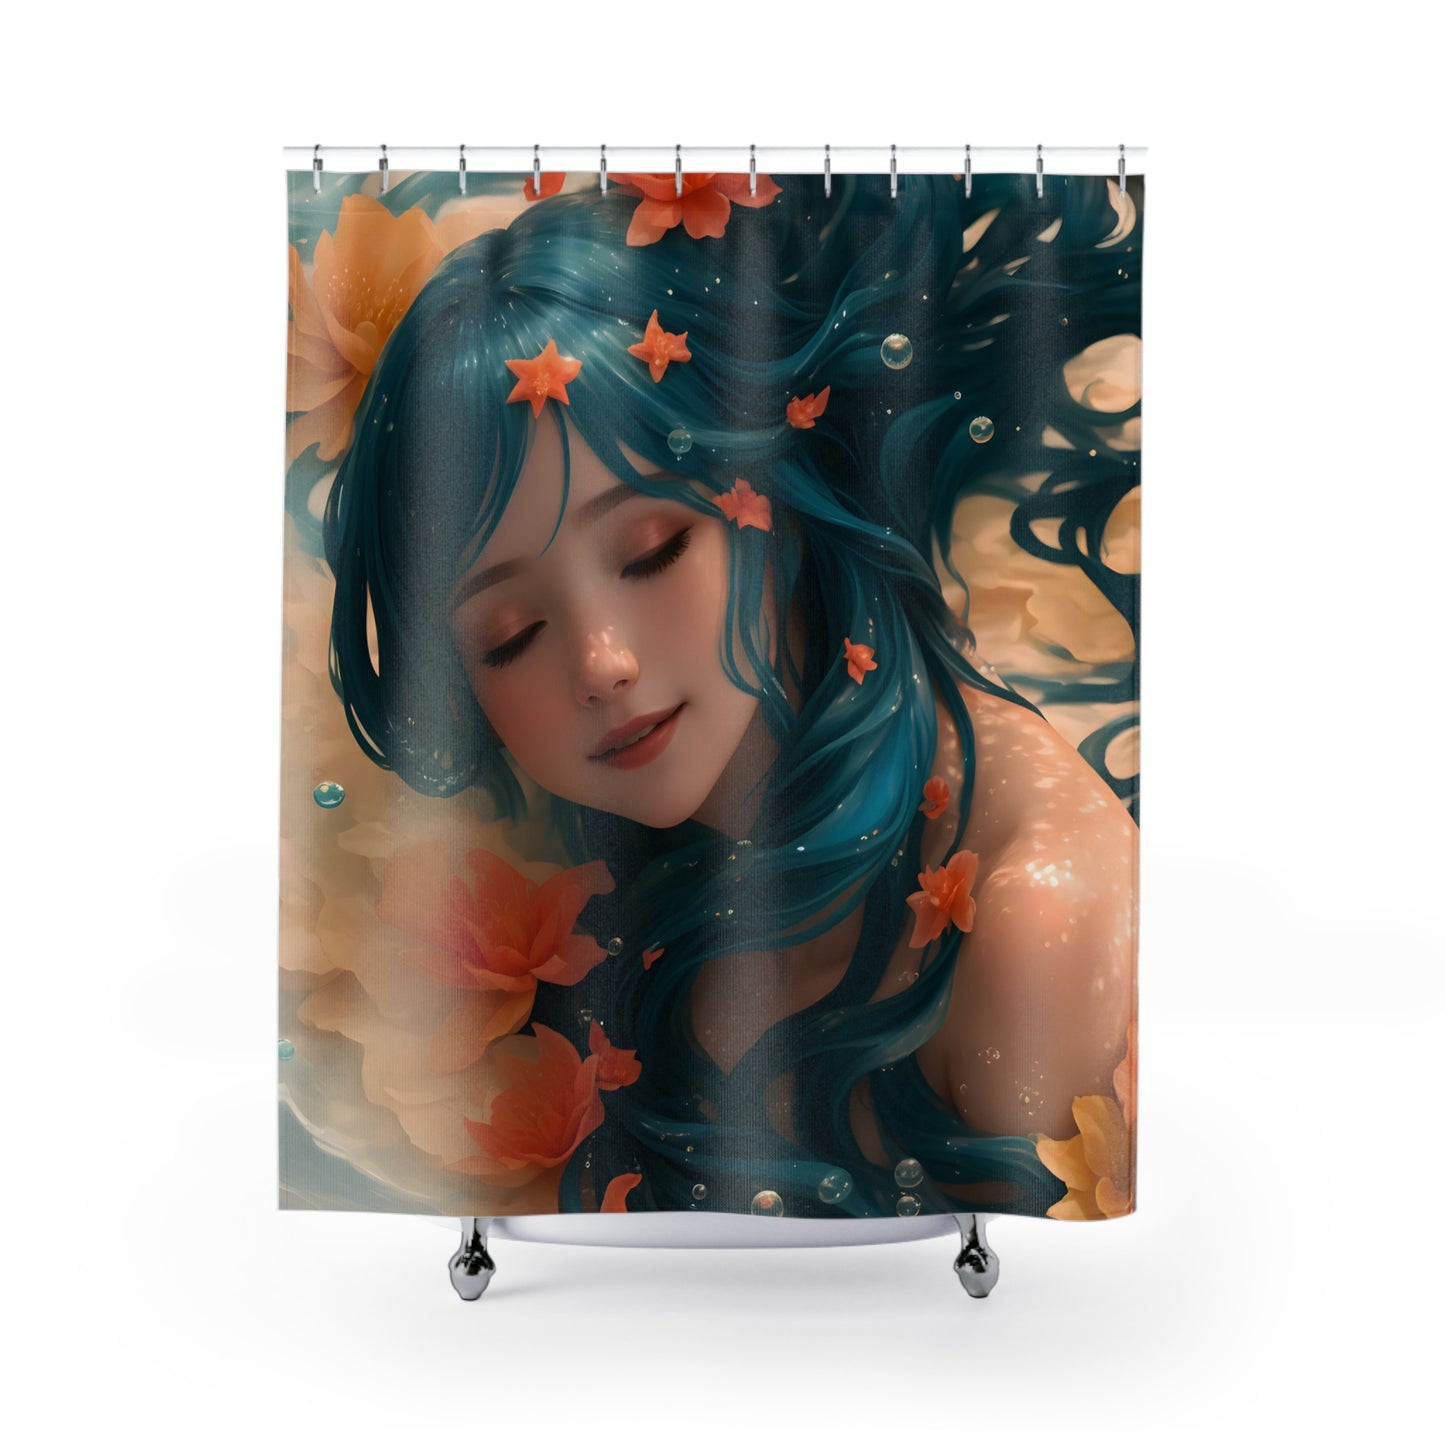 Water's Lullaby Shower Curtain